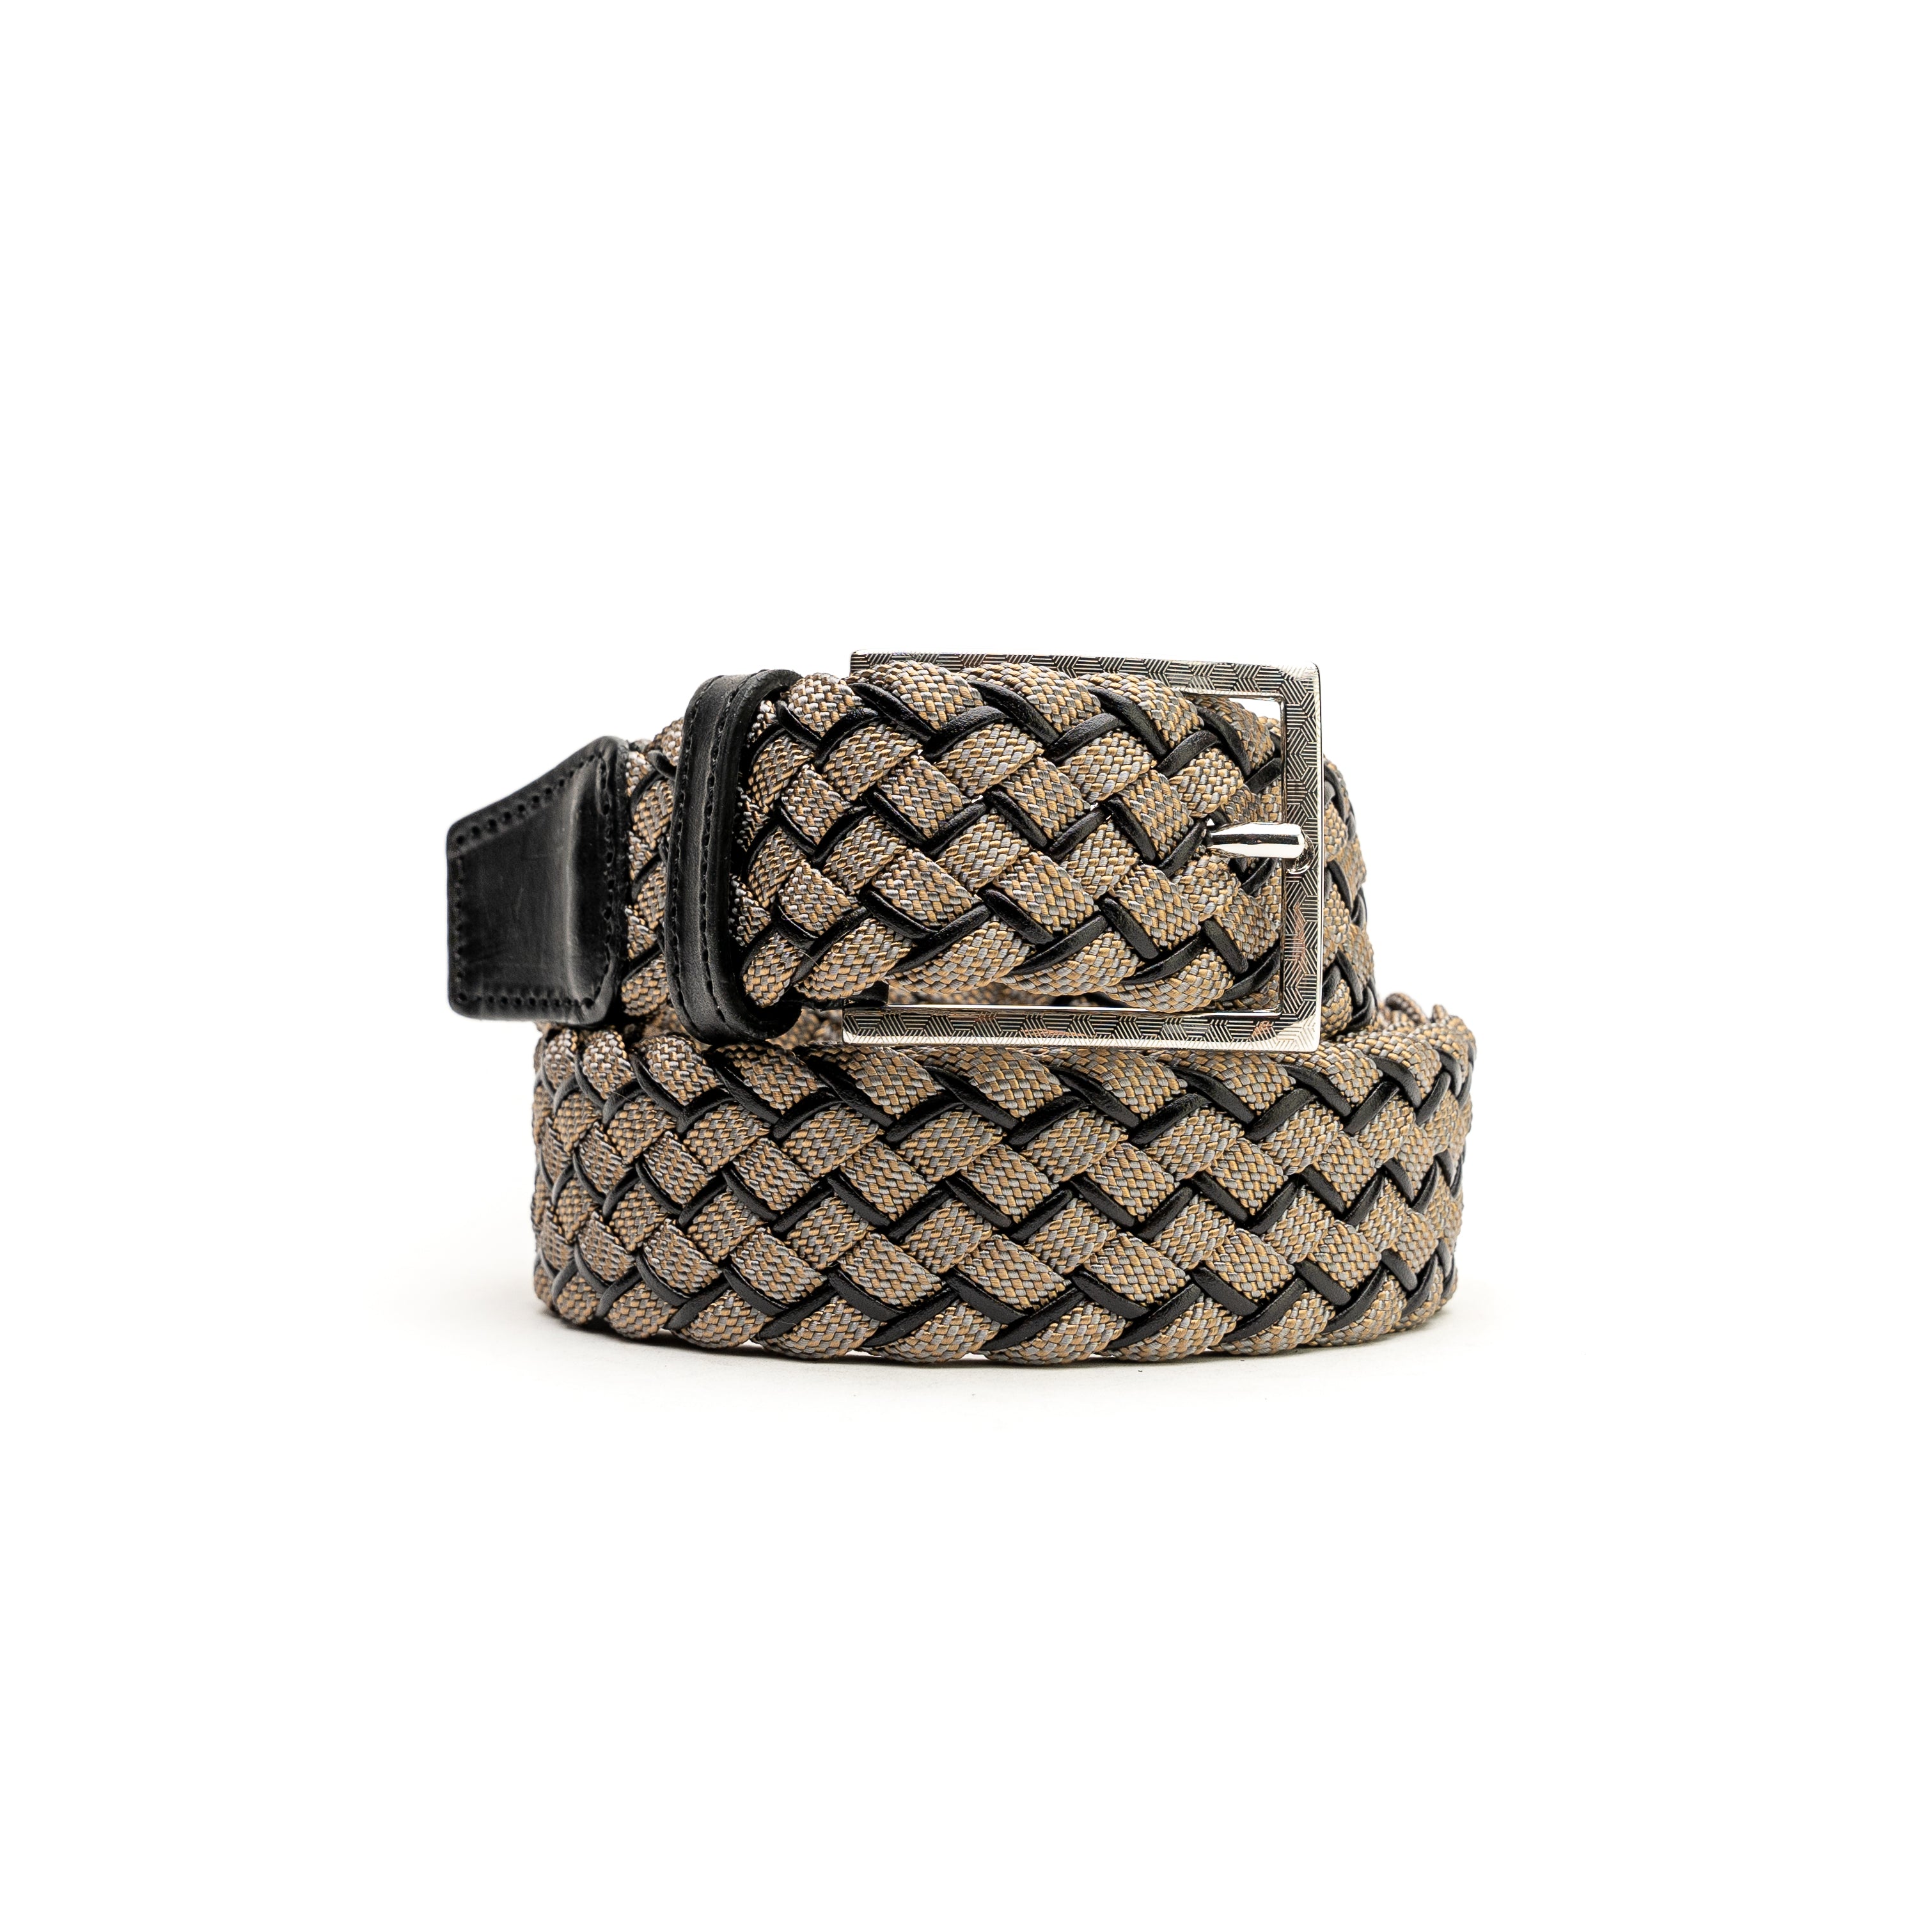 Andrea D'Amico, Braided Belt